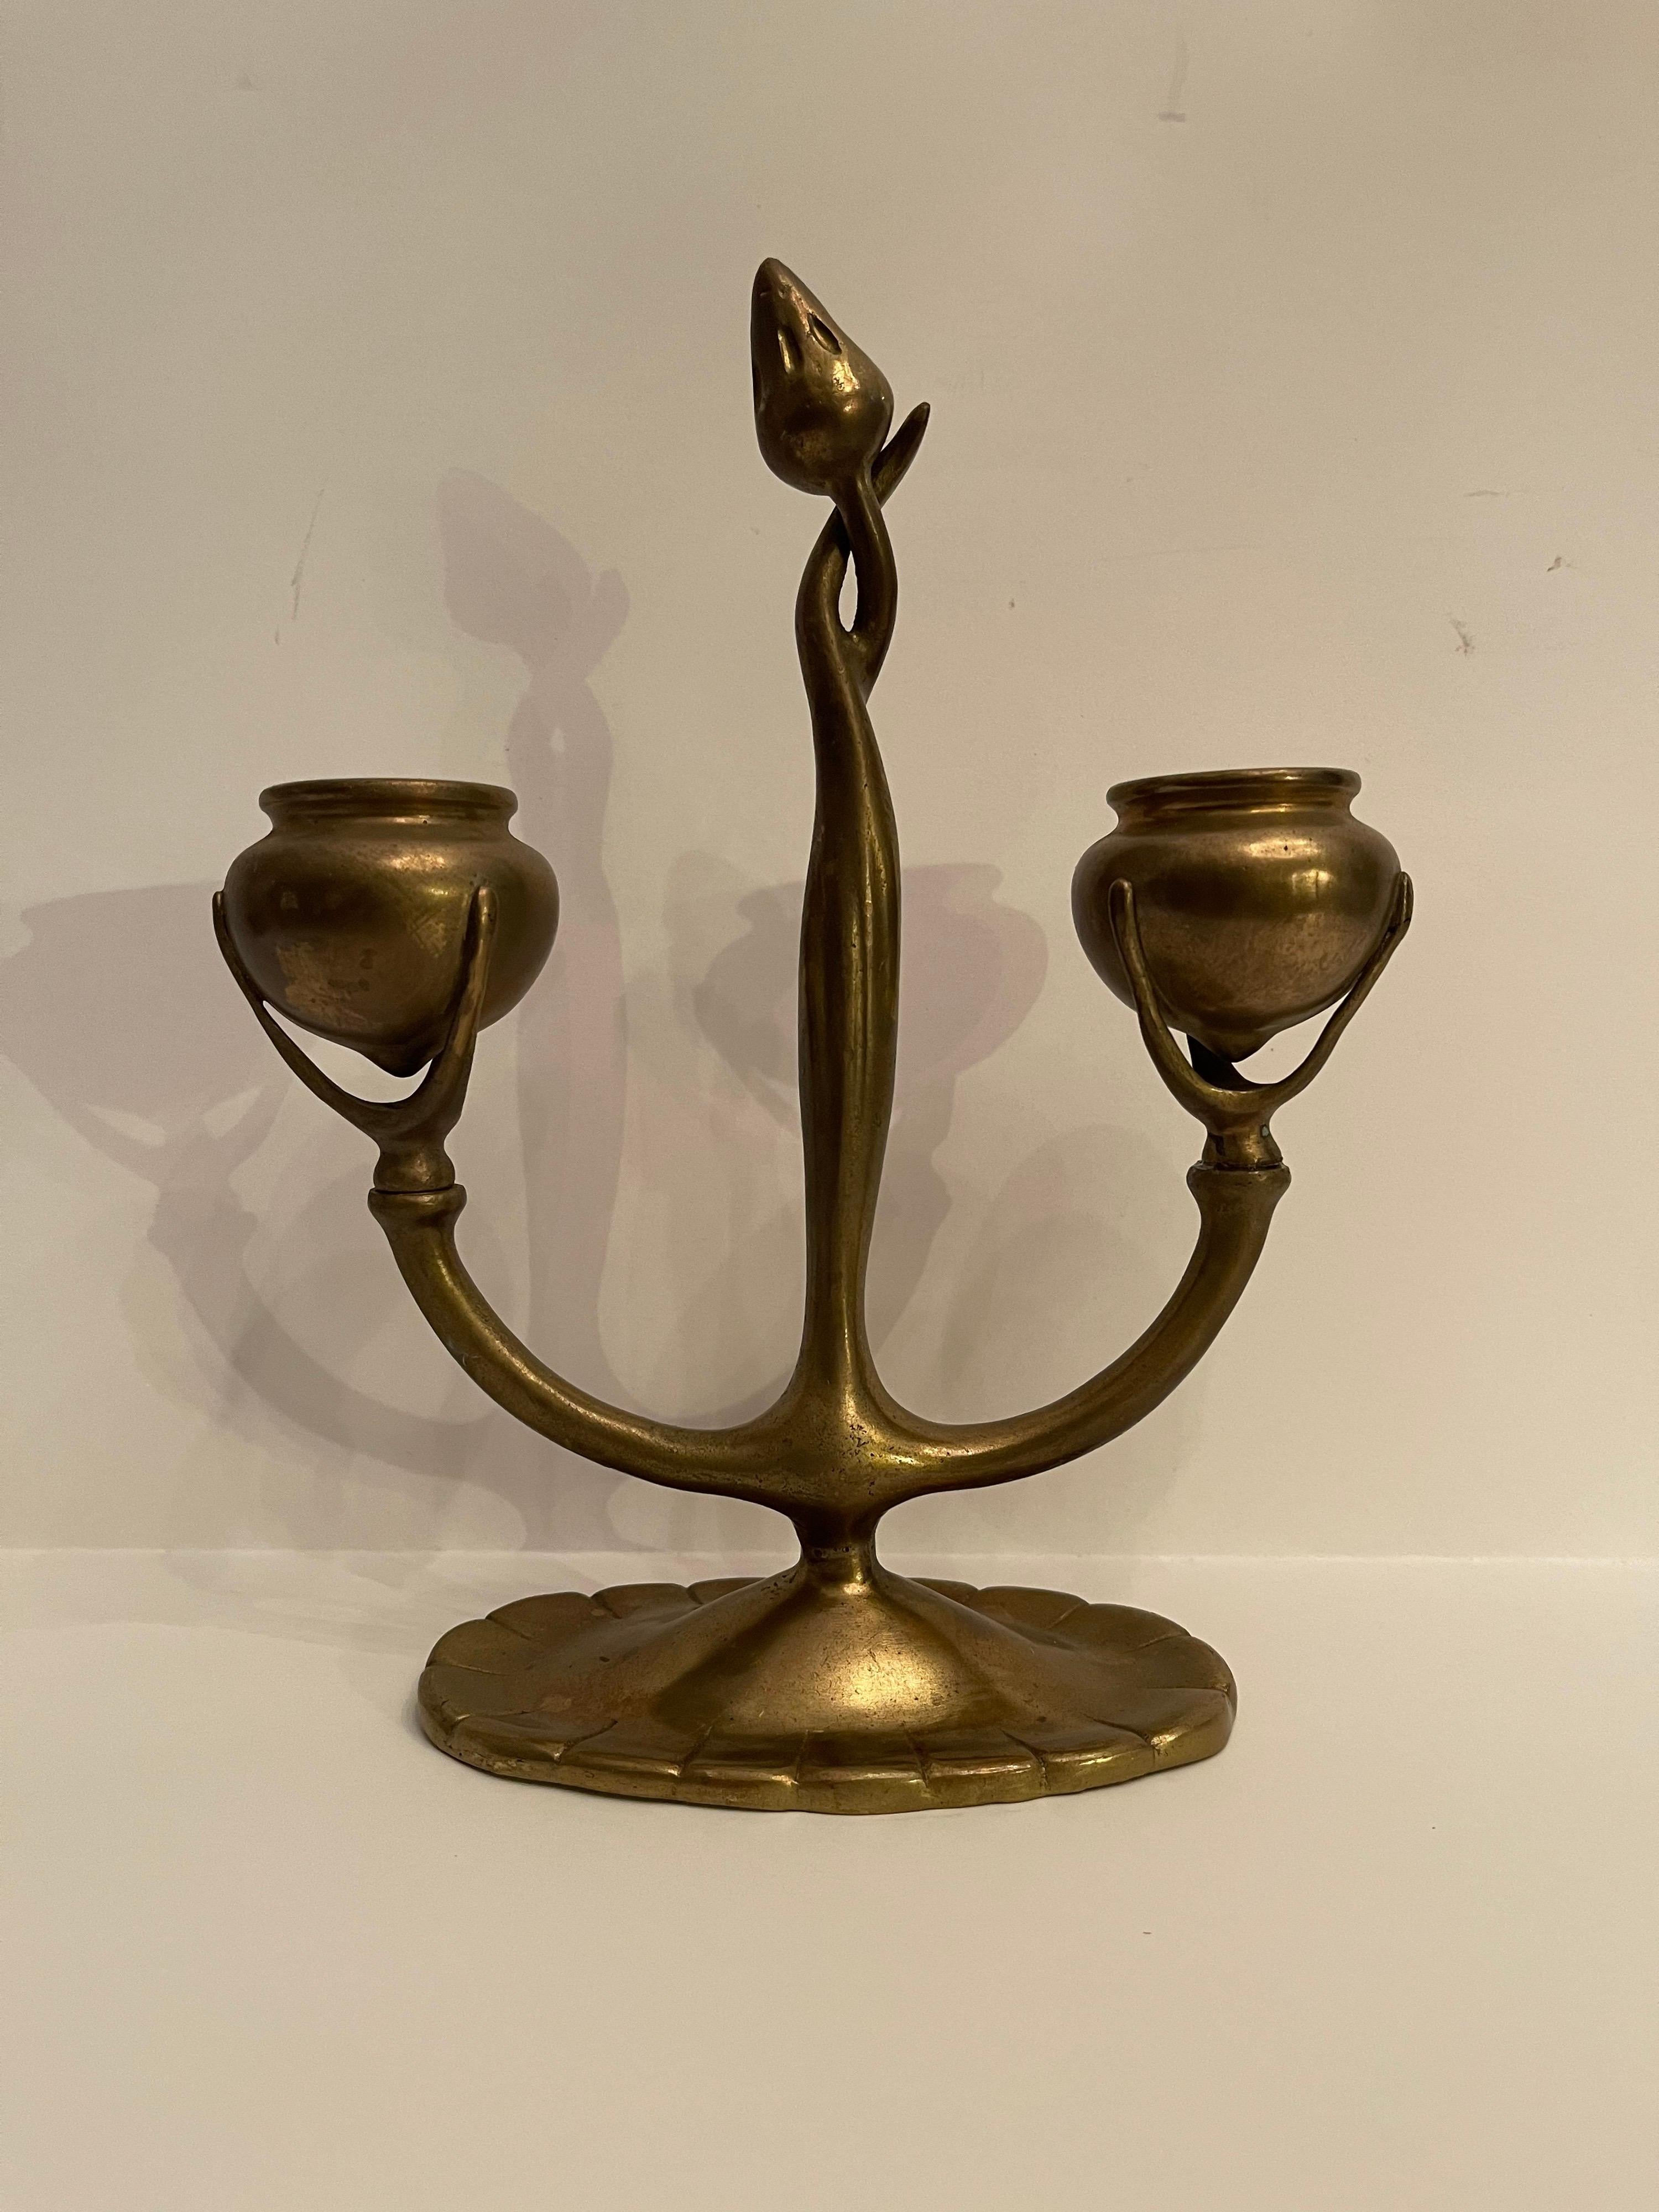 A wonderful pair of Tiffany Studios Poppy flower bud centers candelabrum, 
in the Art Nouveau Design finished in doré bronze gold finish
Stamped: Tiffany Studios/NEW YORK 1230 With Tiffany Studios S In Oval 

Measures: 
Height 9 inches
Width 7